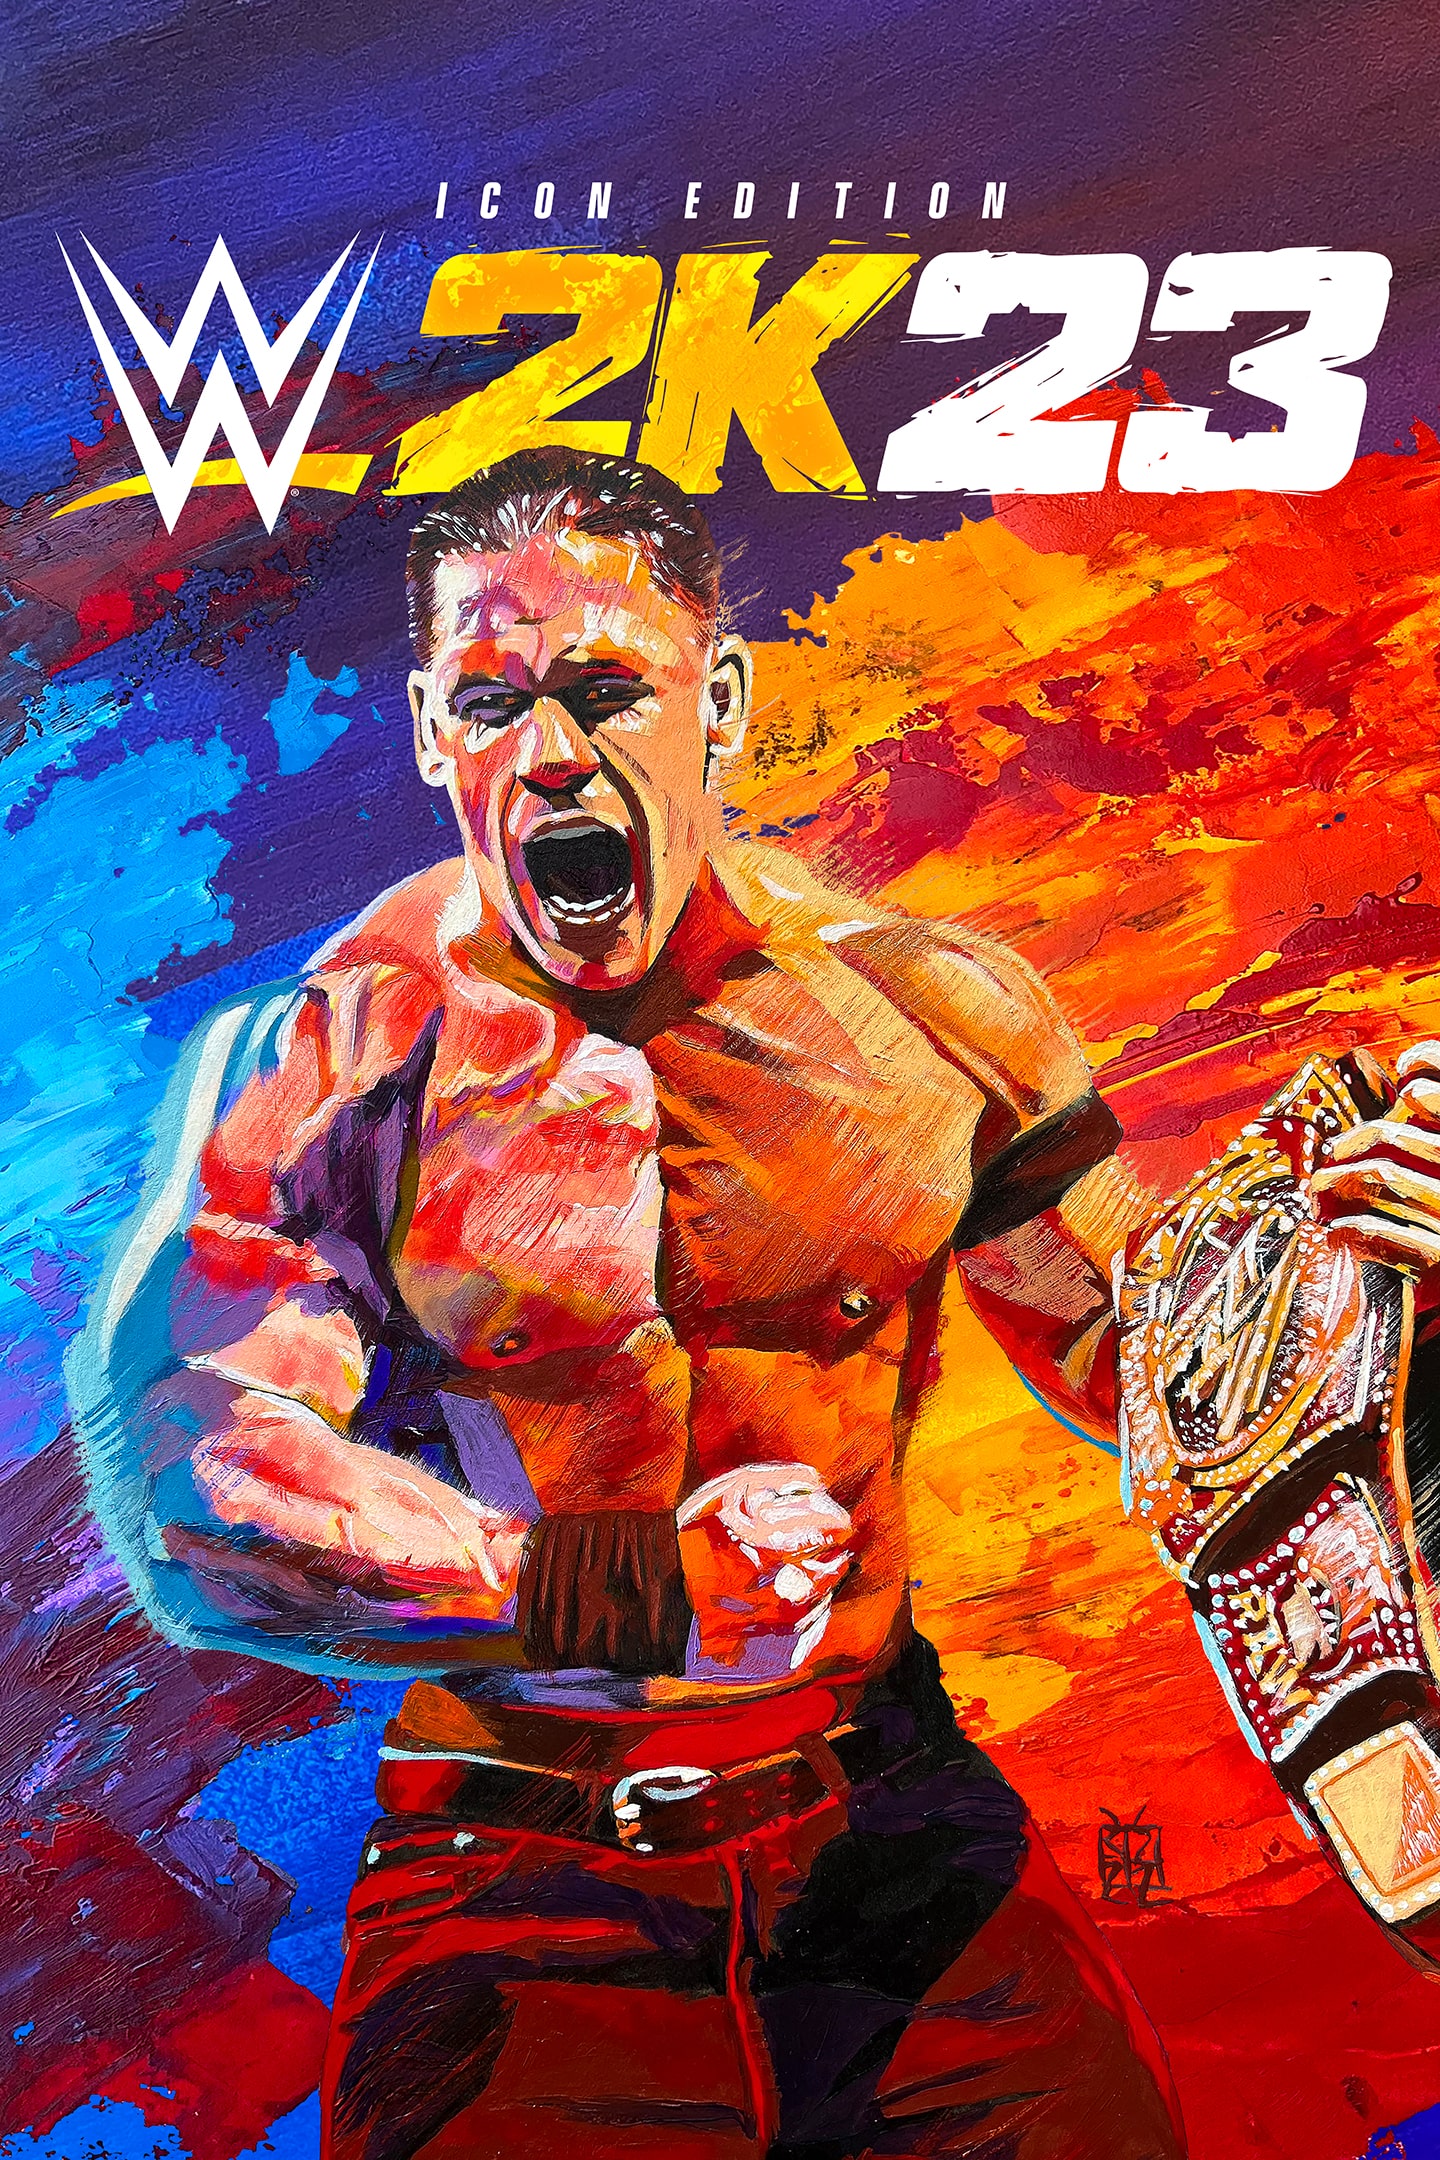 WWE 2K23 - PS4 & PS5 Games